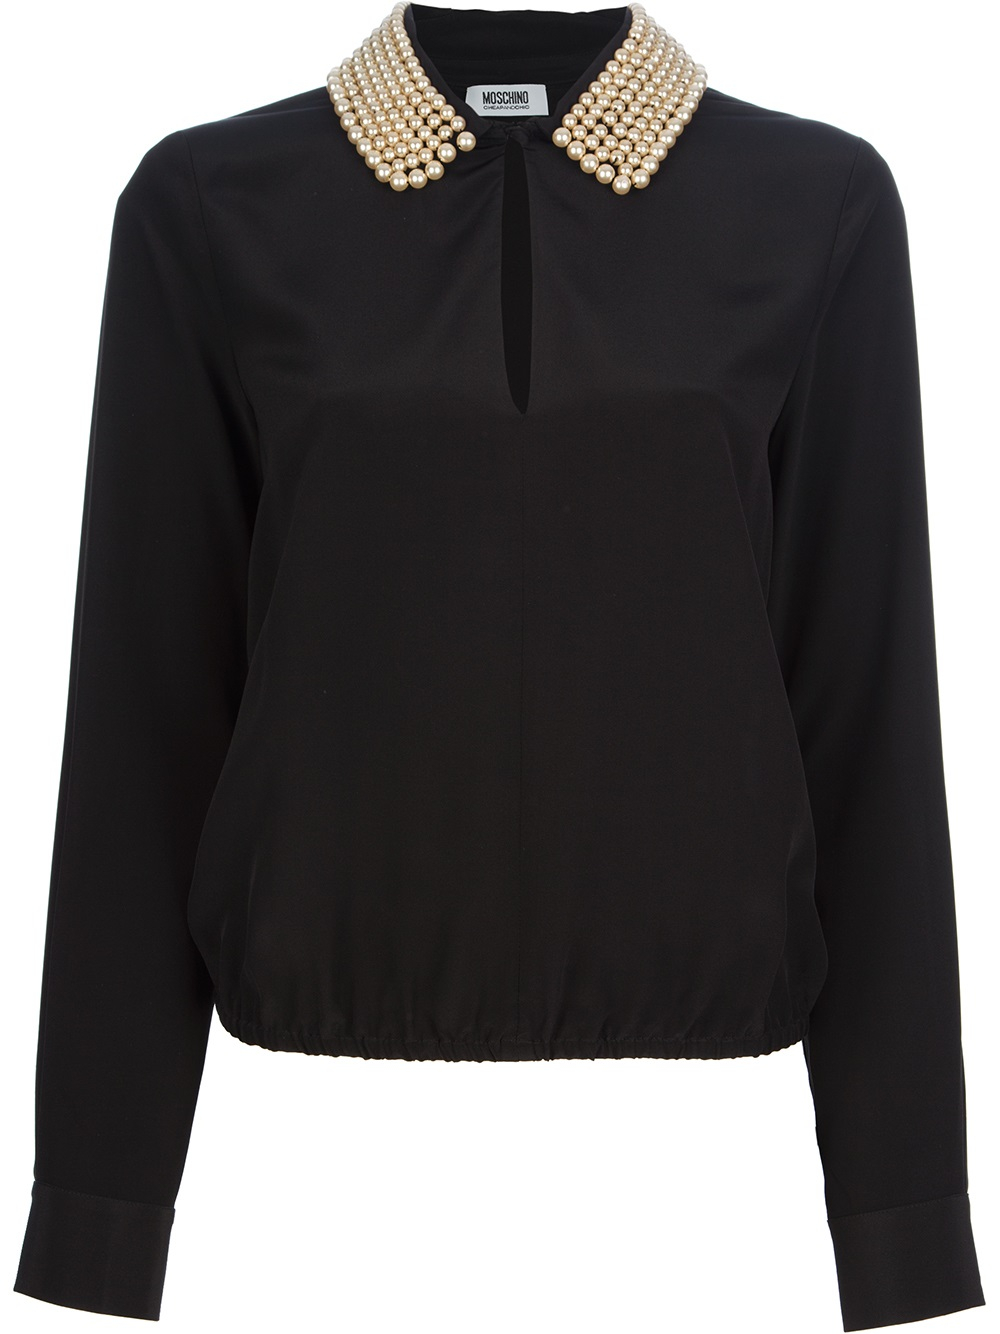 Lyst - Boutique Moschino Pearl Collar Blouse in Black